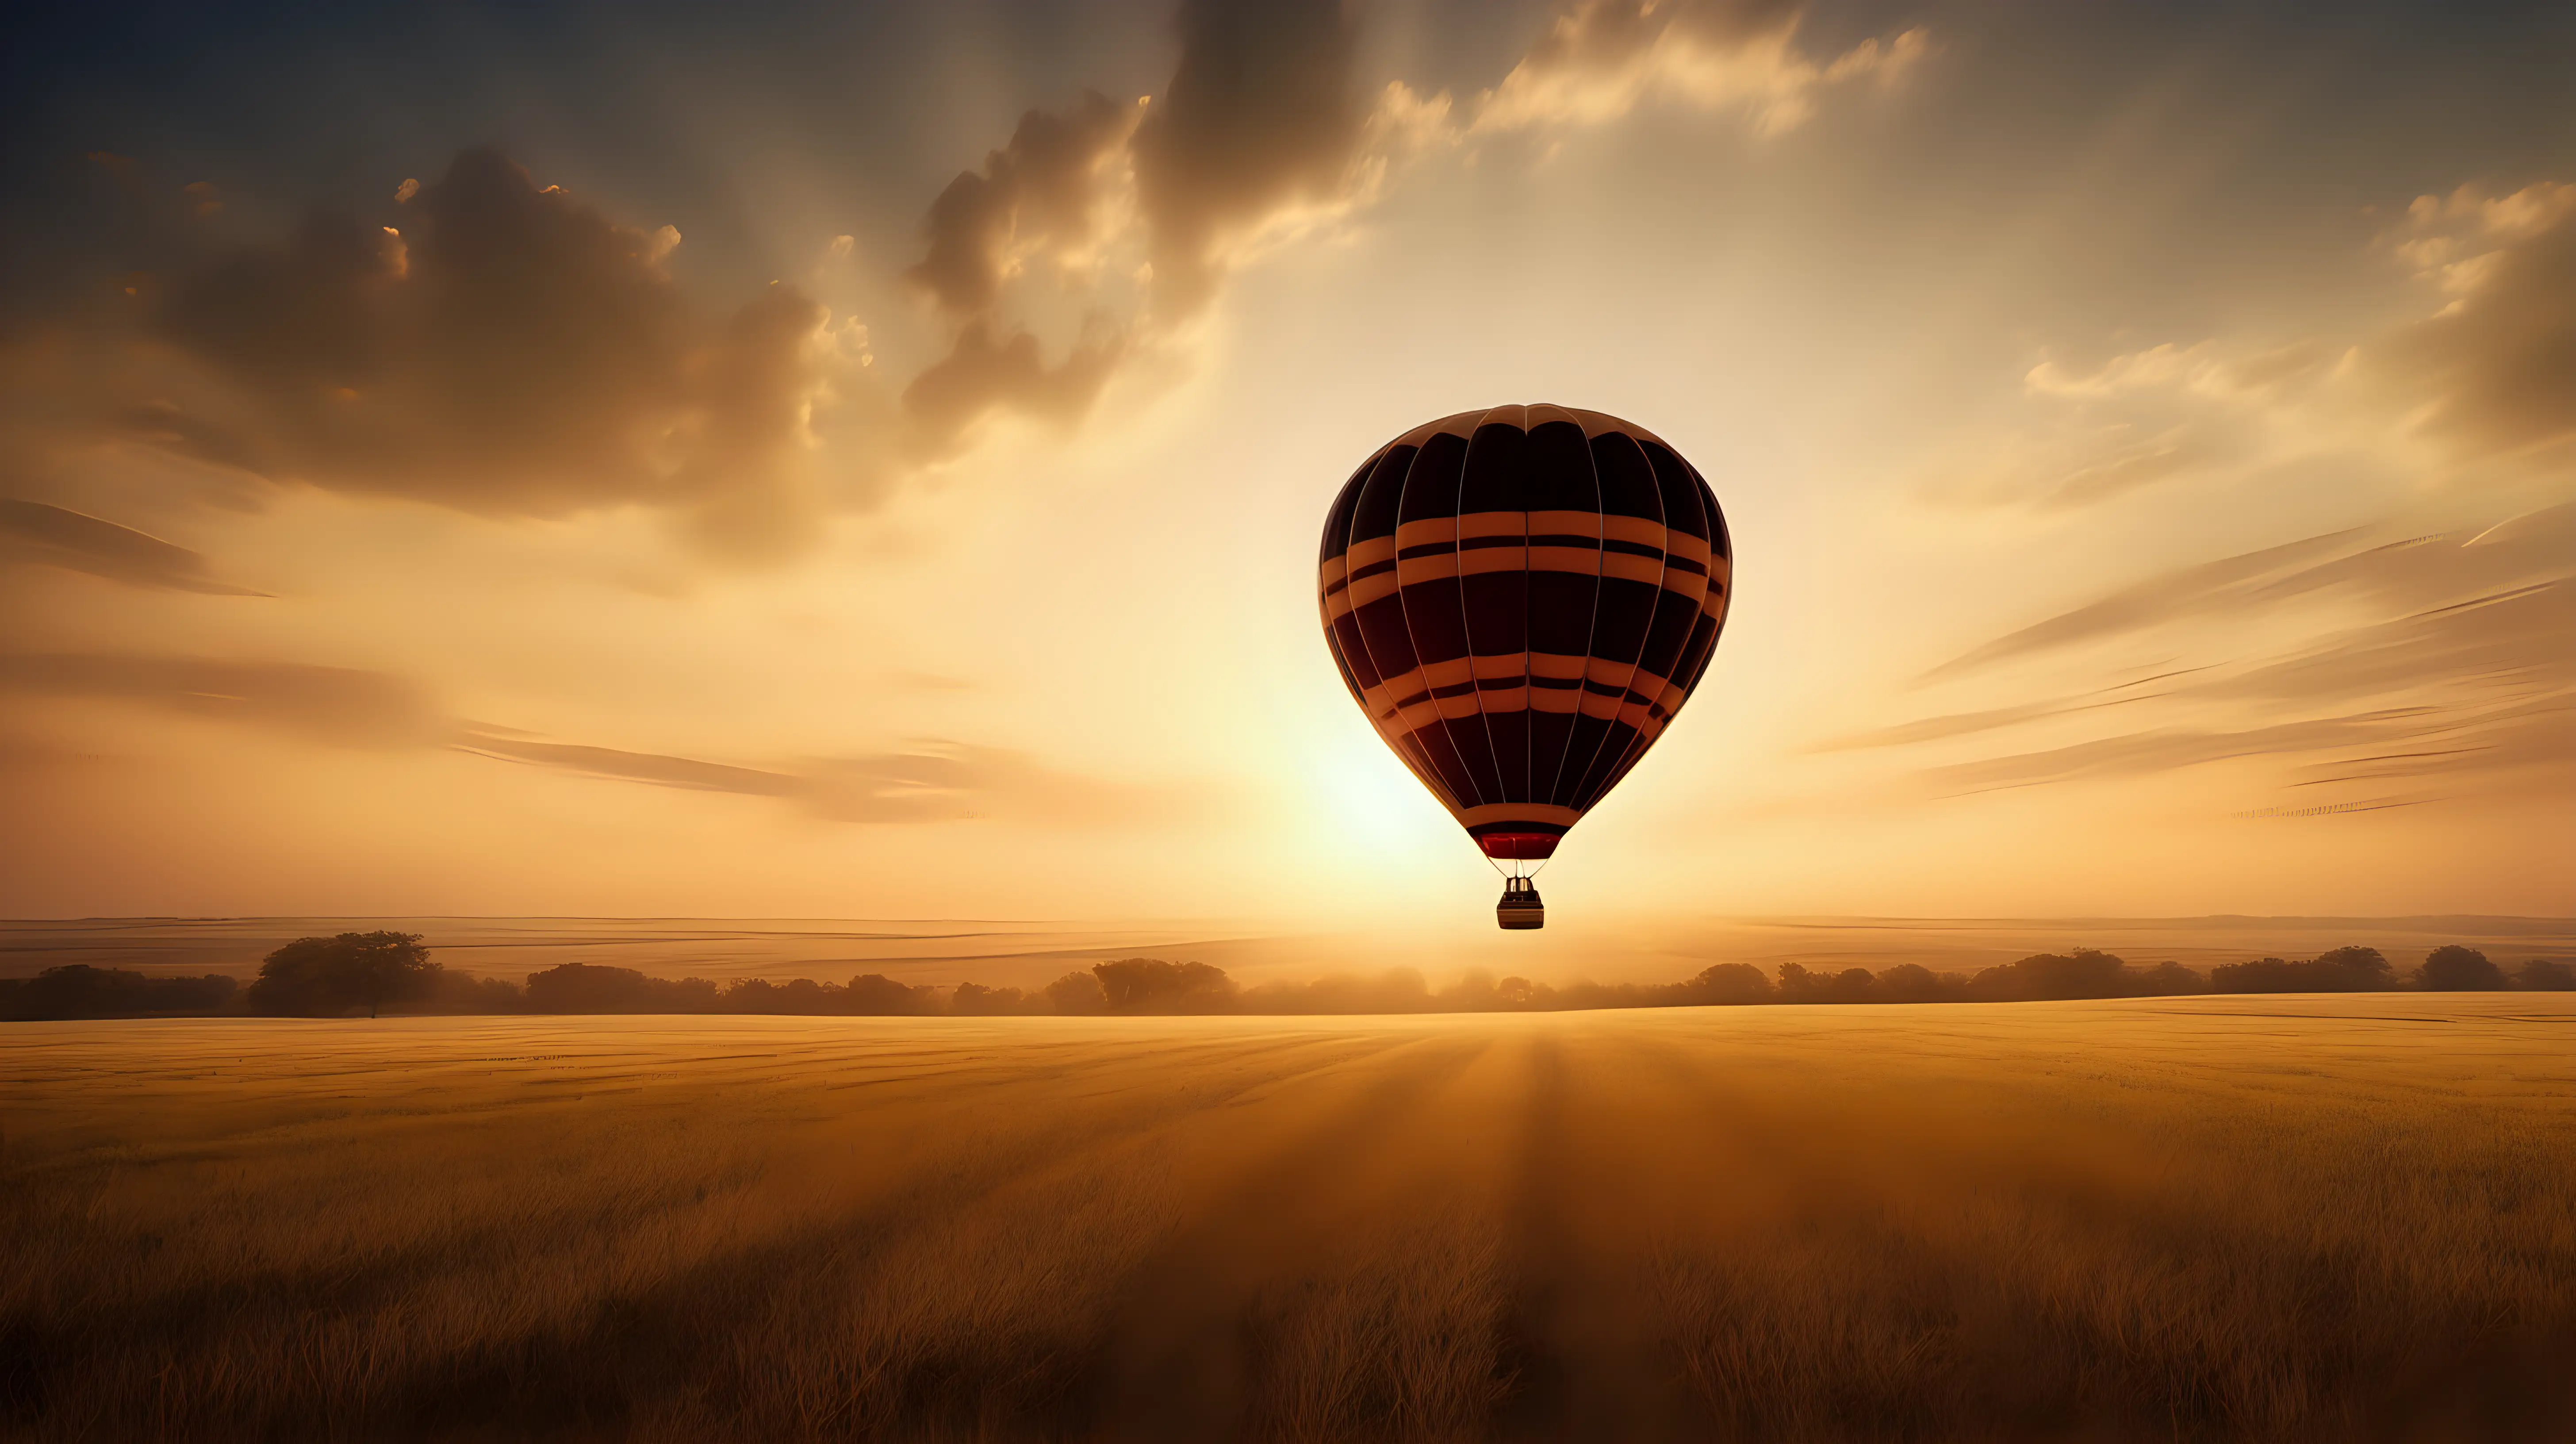 A hot air balloon drifting peacefully across the sky, with the sun setting behind a vast expanse of open fields.